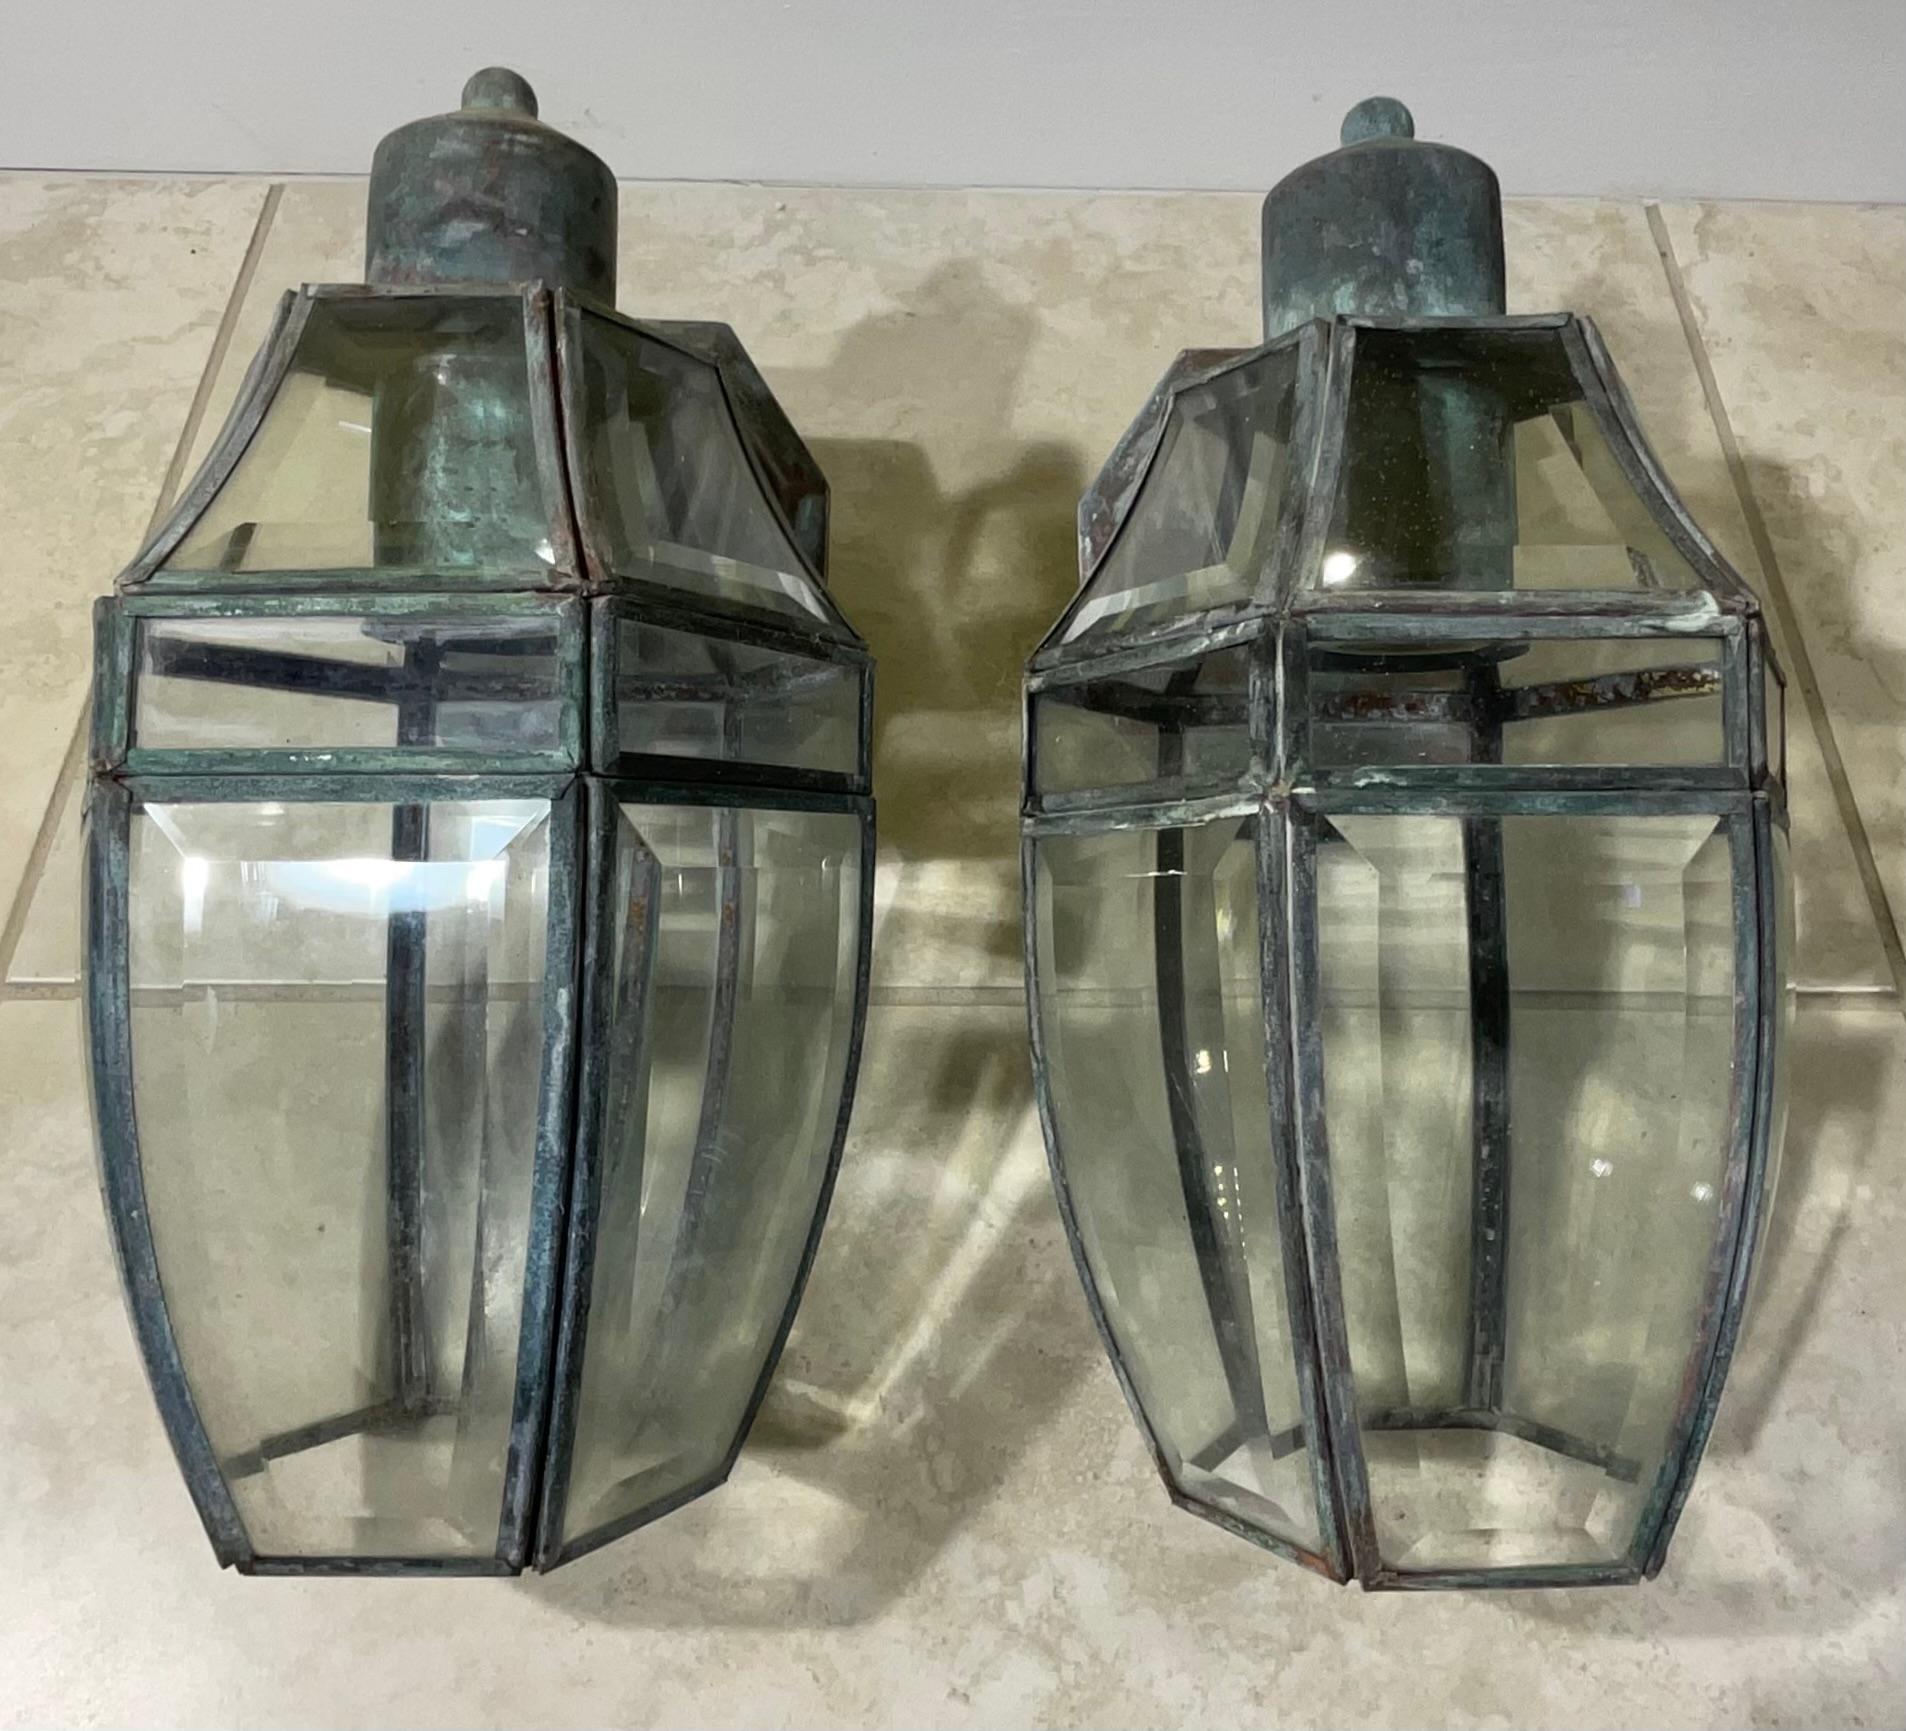 Elegant pair of wall lantern handcrafted from solid brass ,with one 60/watt light each. 
 Suitable for wet locations, electrified and ready to use.
Beautiful beveled glass.
decorative pair of lantern indoor or outdoor.